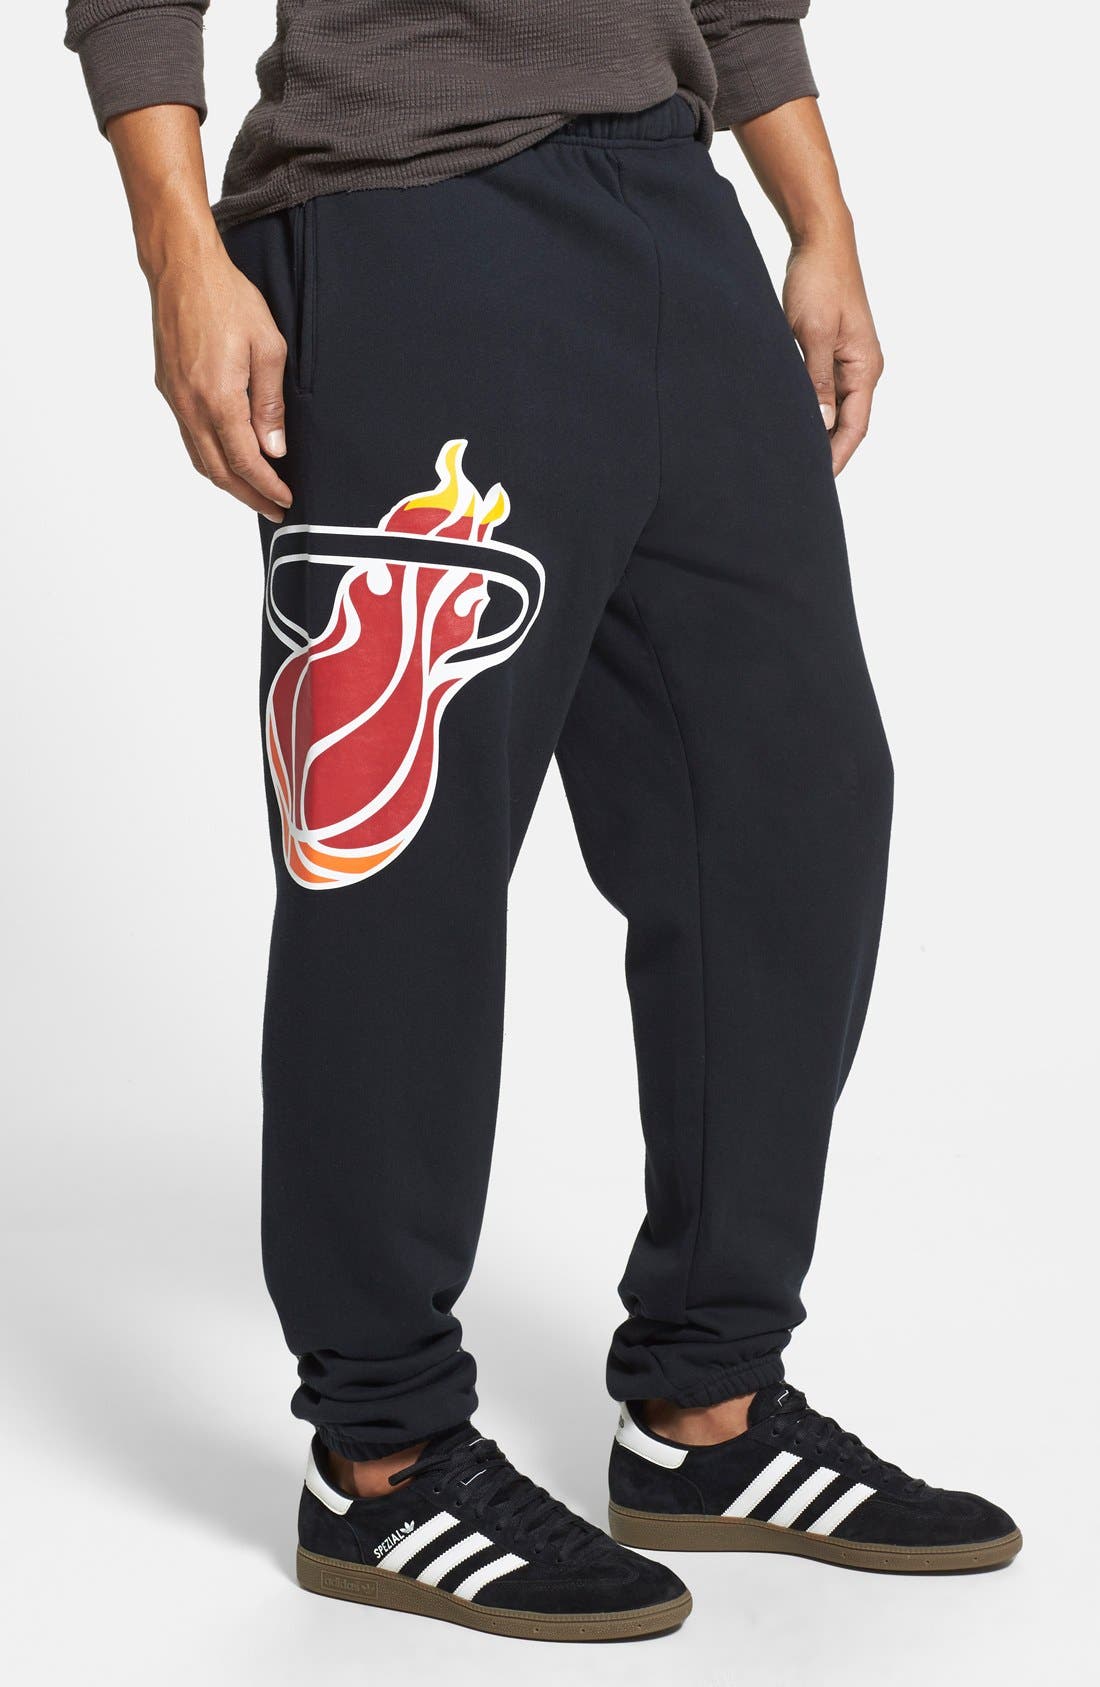 Miami Heat' Relaxed Fit Sweatpants 